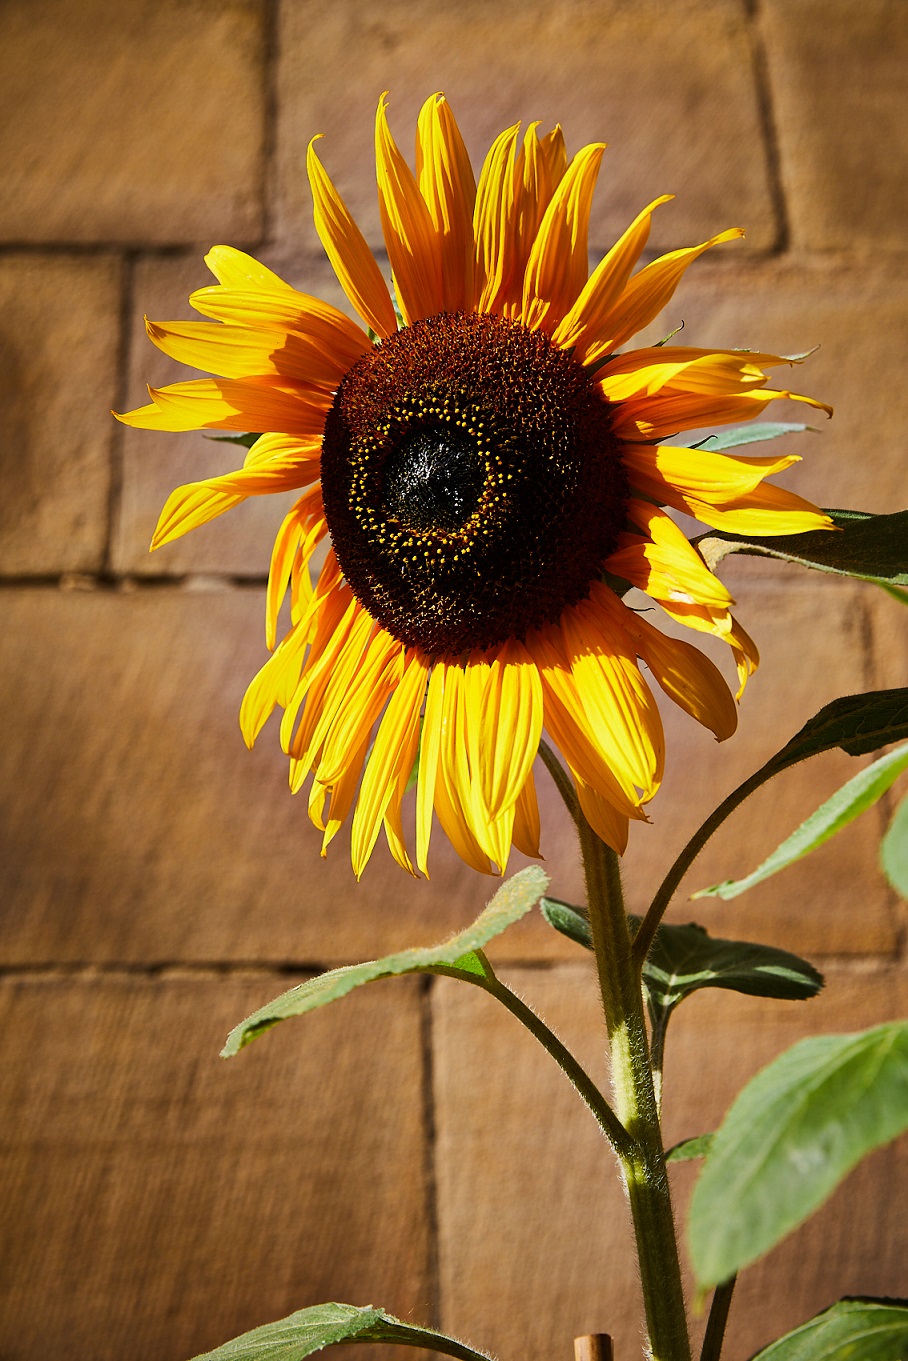 Close up on the head of a sunflower in full bloom